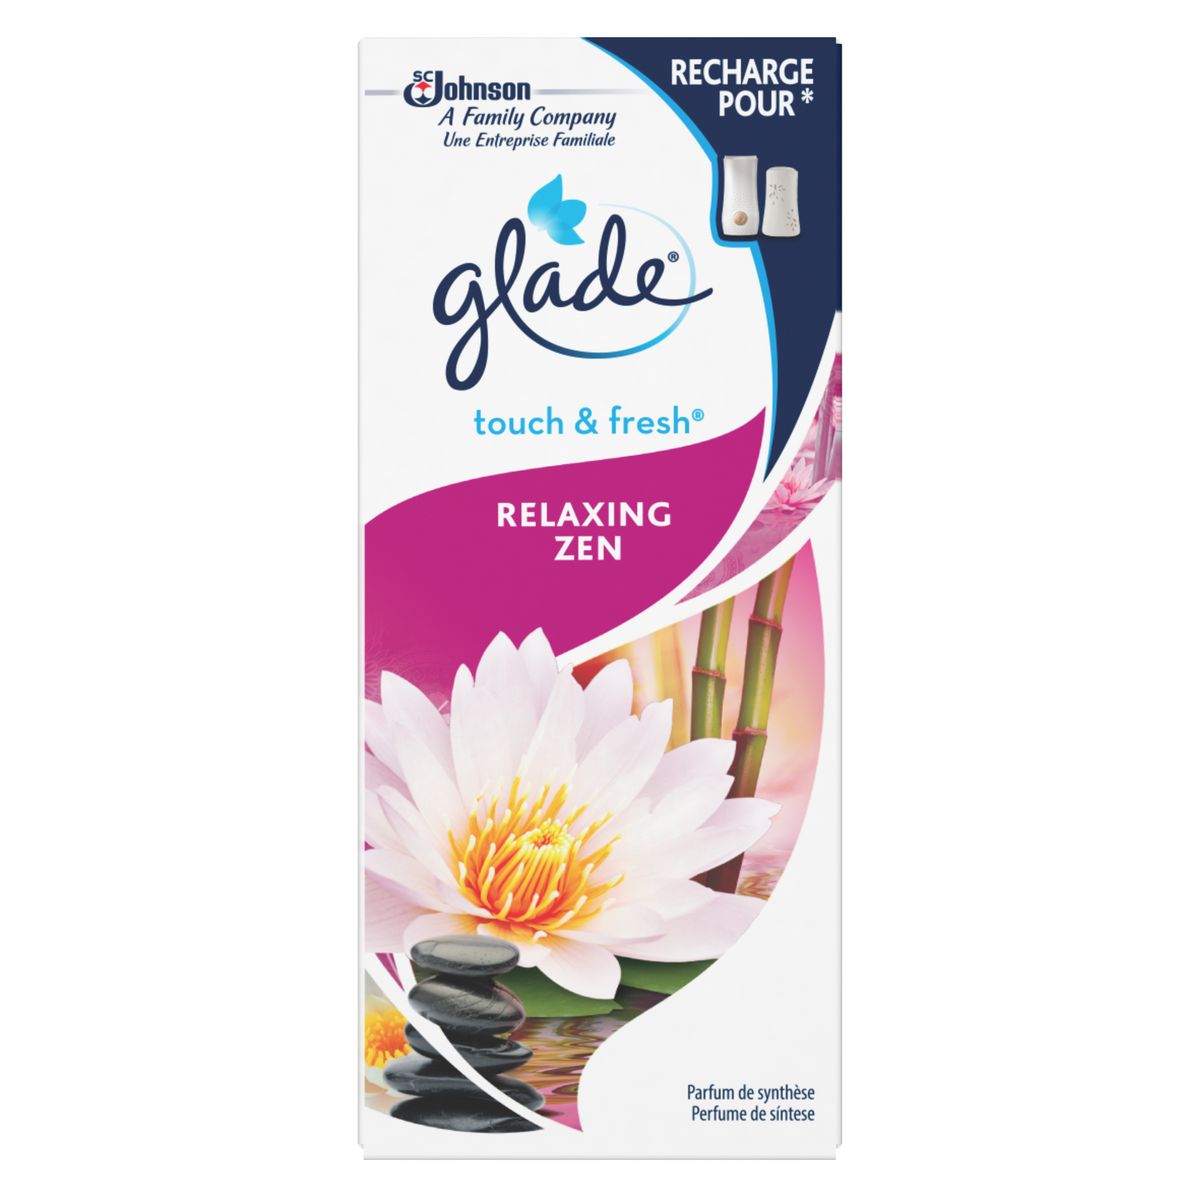 GLADE Recharge relaxing zen pour diffuseur touch & fresh 1 recharge